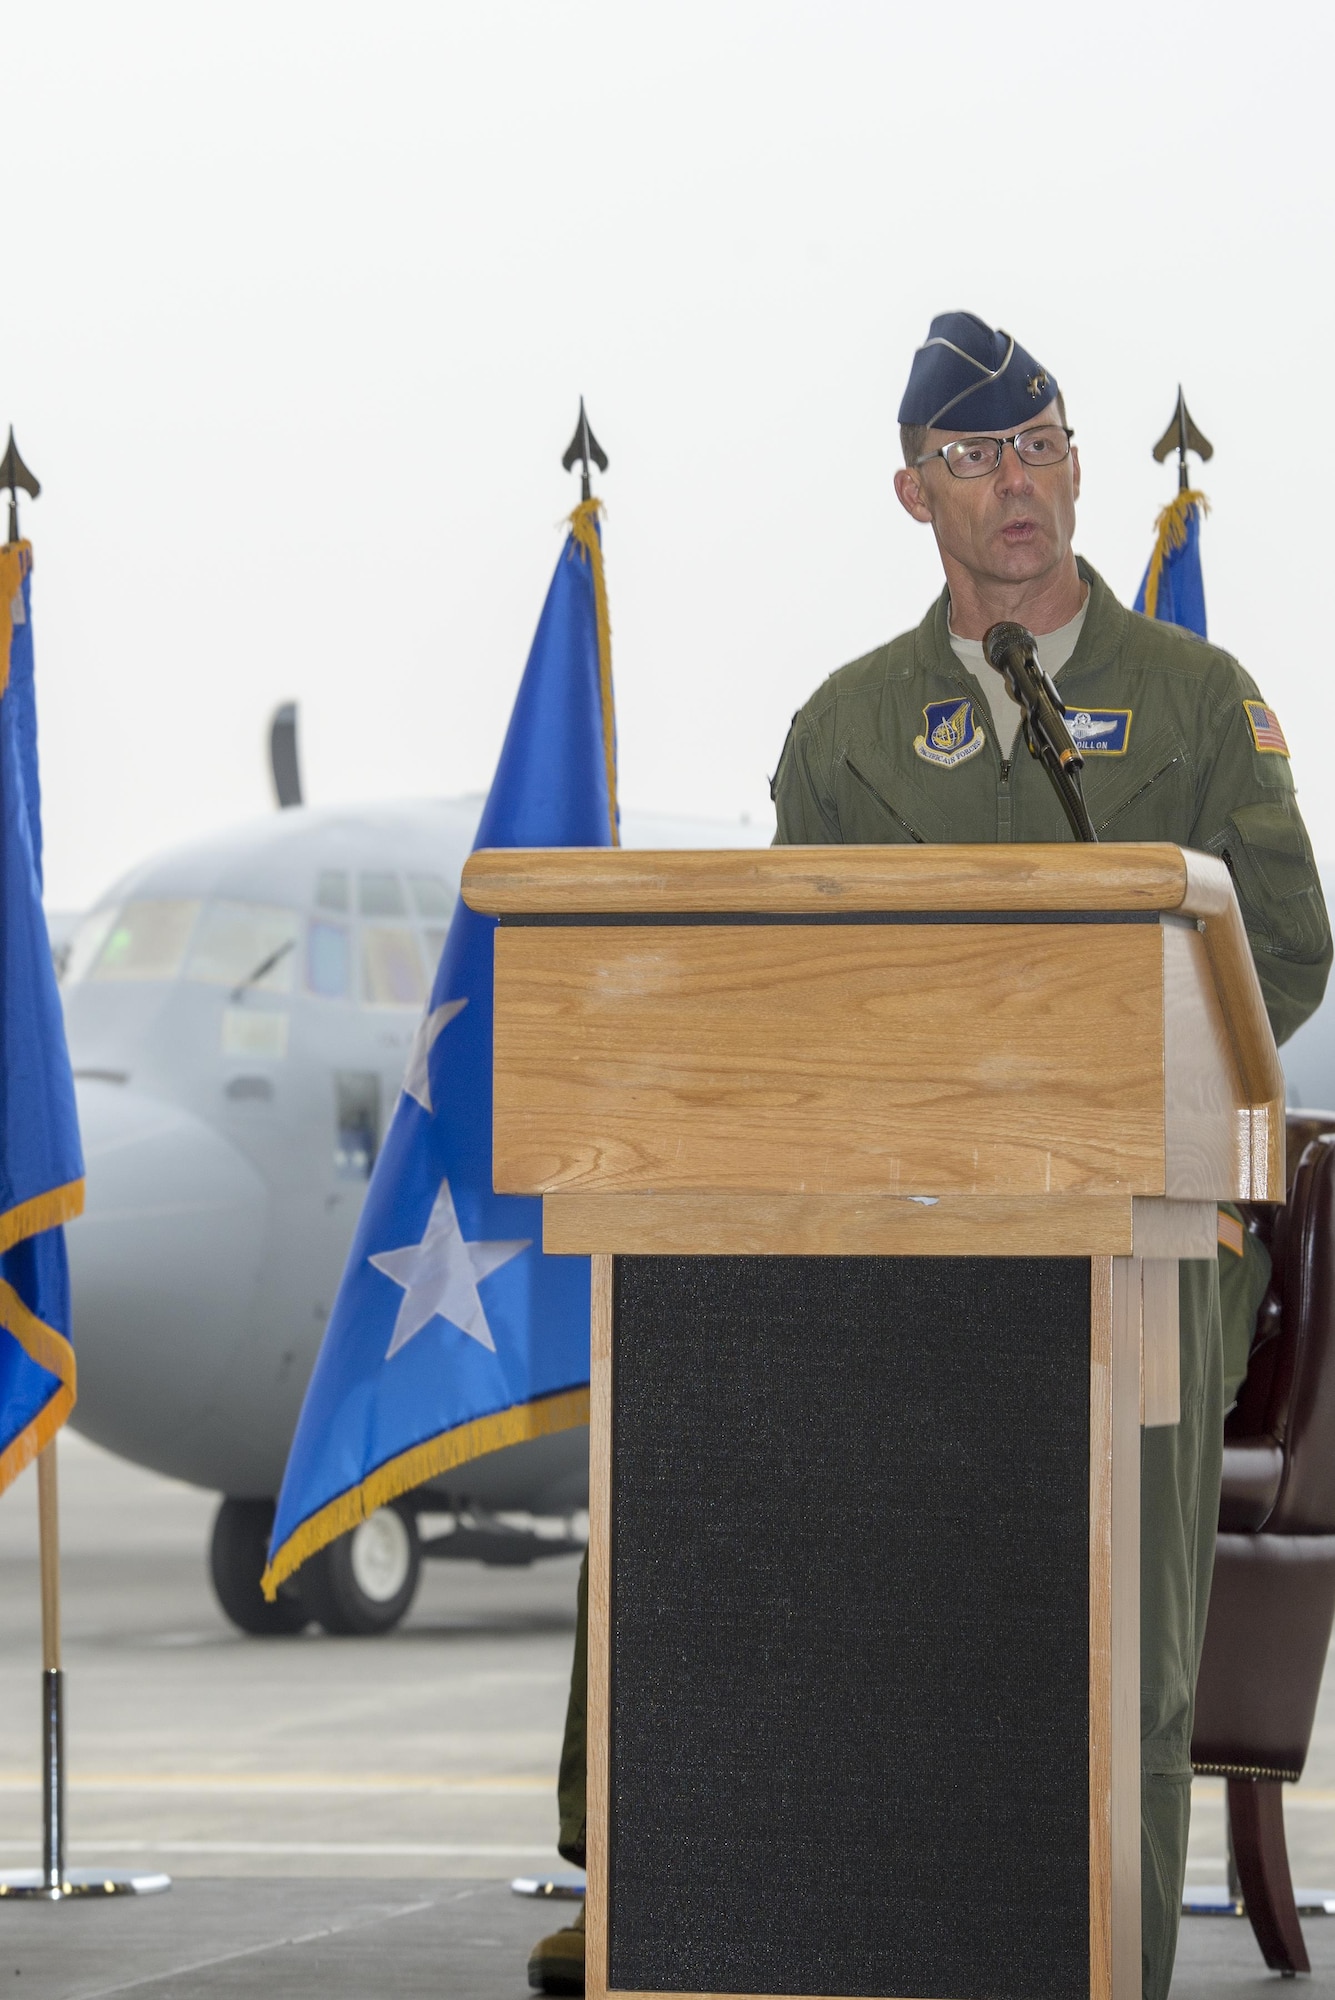 Maj. Gen. Mark Dillon, Pacific Air Forces vice-commander, gives a speech during a ceremony held to celebrate the arrival of the first C-130J Super Hercules assigned to Yokota Air Base, Japan, Mar. 6, 2017. The aircraft provides significant performance improvements and added operational capabilities that translate directly into increased effectiveness. (U.S. Air Force photo by Senior Airman David C. Danford)